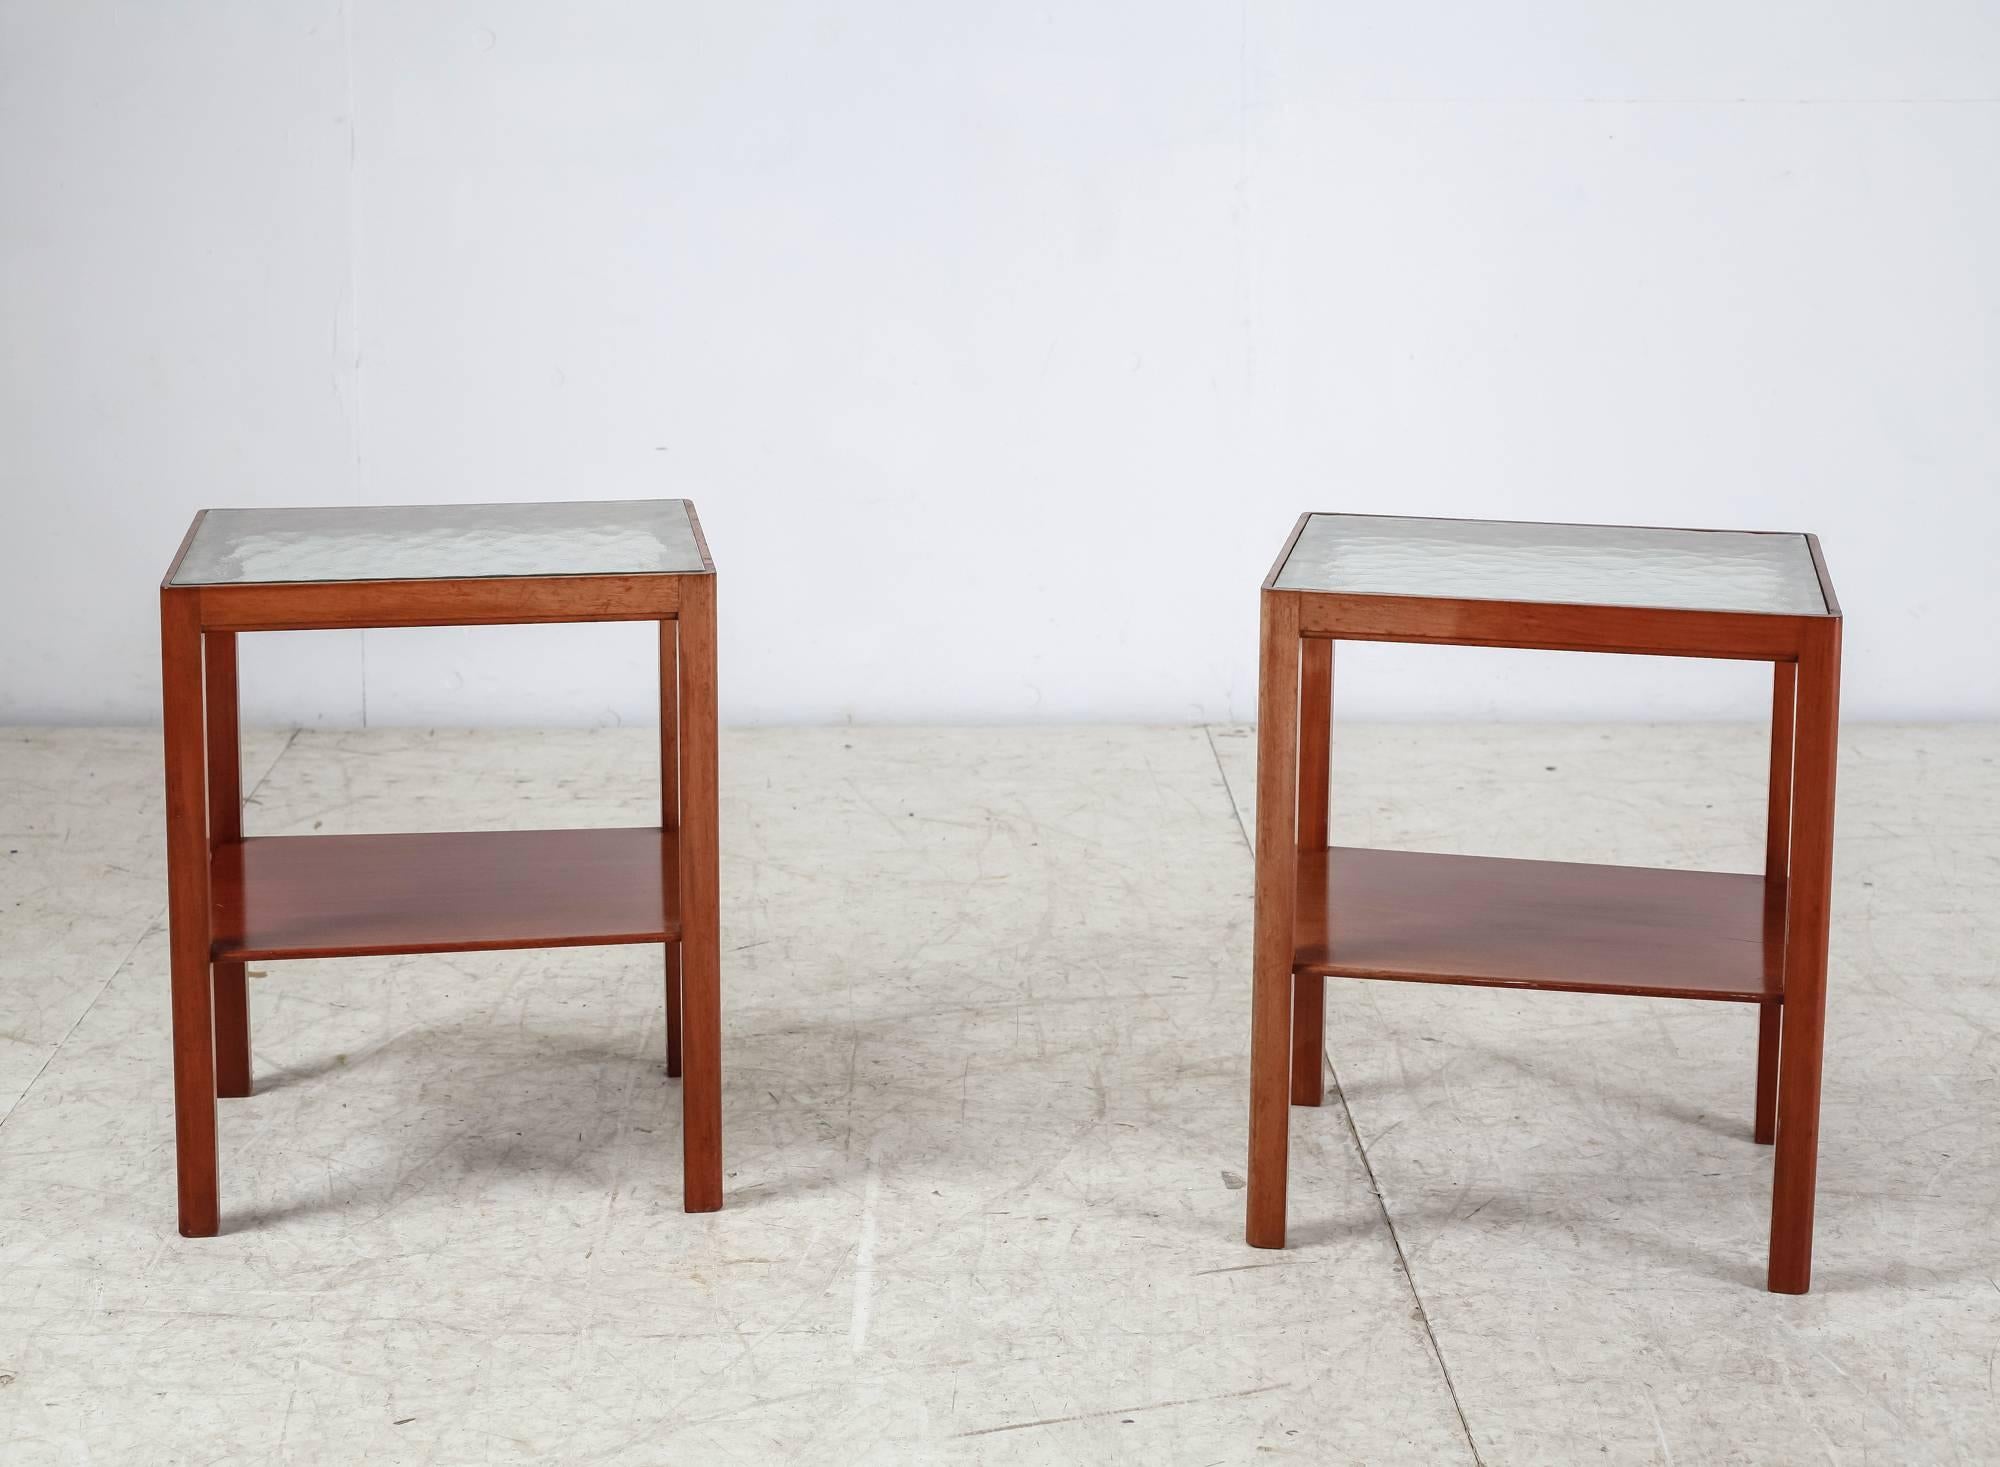 A pair of end or side tables by Danish cabinetmaker Thorald Madsen. They are made of a rounded Cuban mahogany frame with a top of beautiful old, textured glass. There also is a mahogany shelf underneath.
Labeled by Madsen and in a wonderful